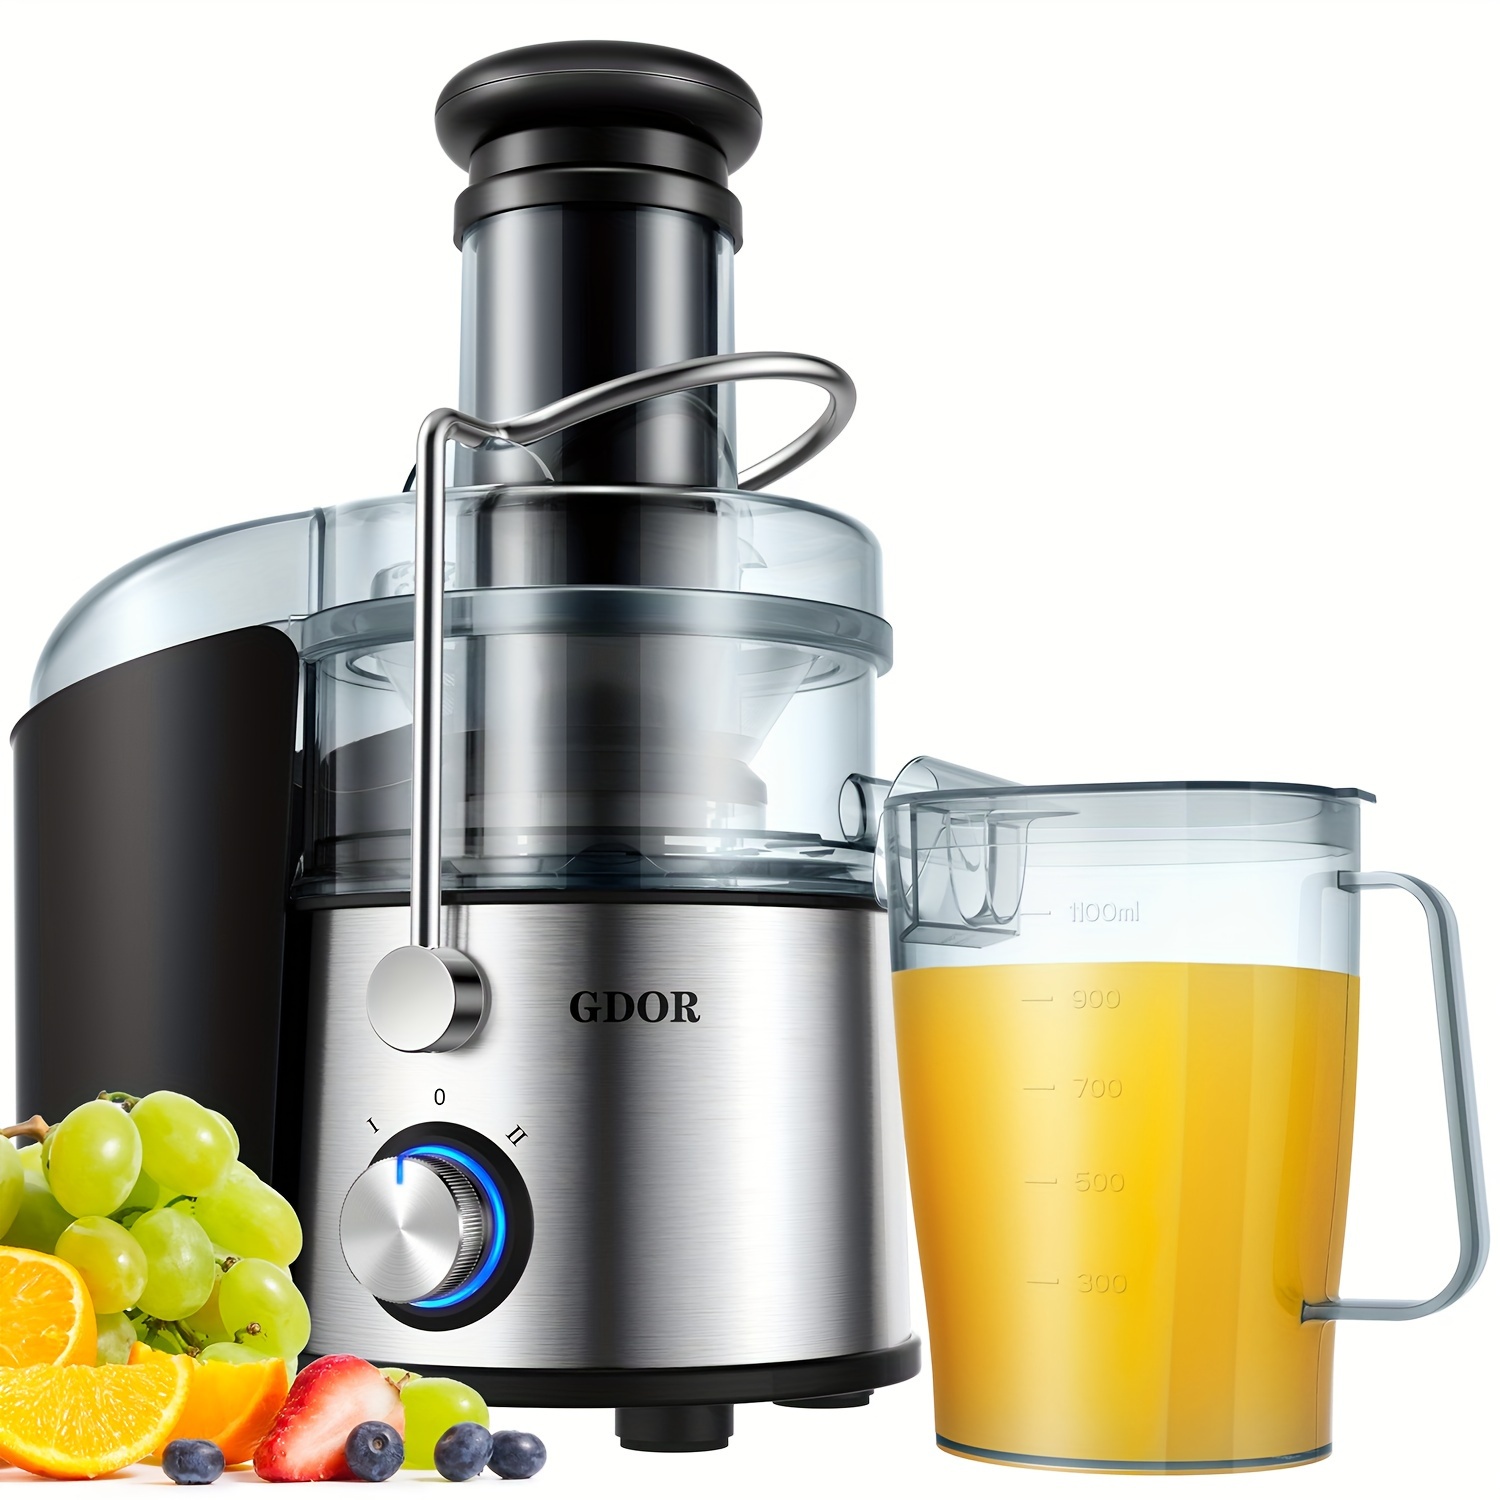 

Gdor Juicer With Titanium Enhanced Cut Disc, Larger 3 "feed Chute Juicer Machines For Whole Fruits And Vegetables, Centrifugal Juicer With 40 Oz Juice Pitcher, Bpa-free, Easy To Clean, Silver.